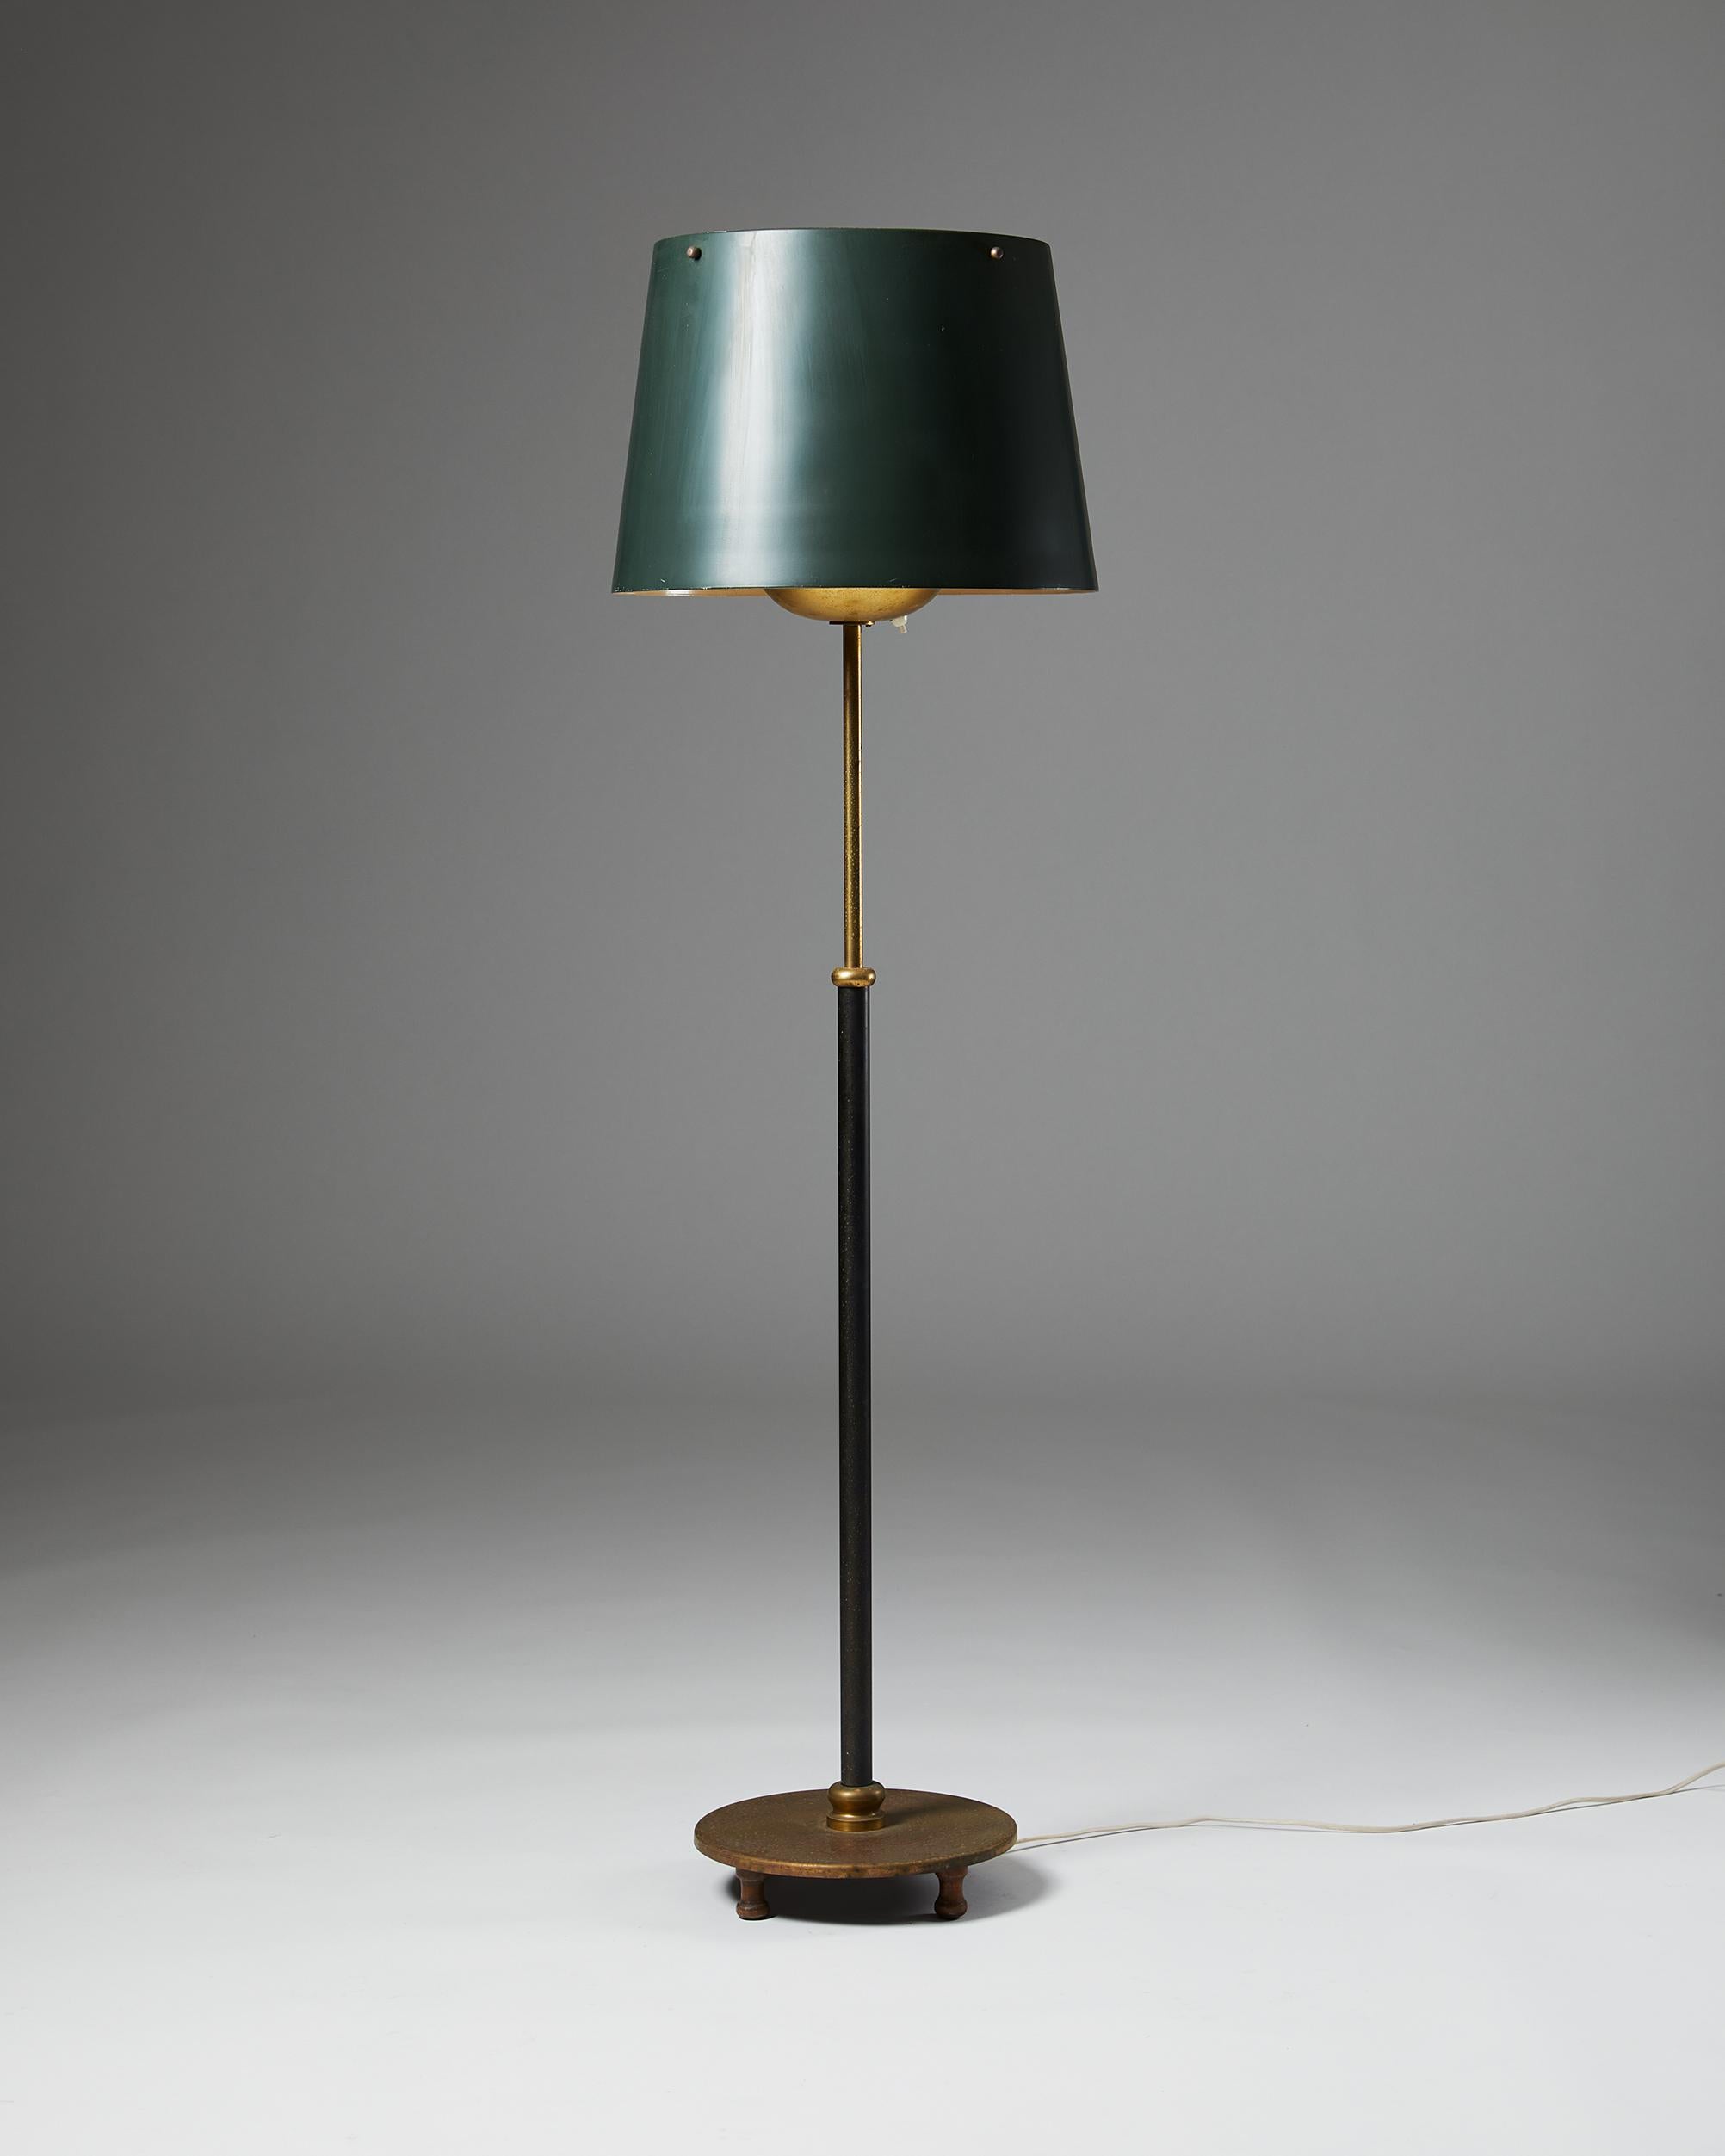 Black lacquered brass with metal shade.

The height is adjustable.

Measures: H: Adjustable. 120 cm - 170 cm/ 3'11 1/4